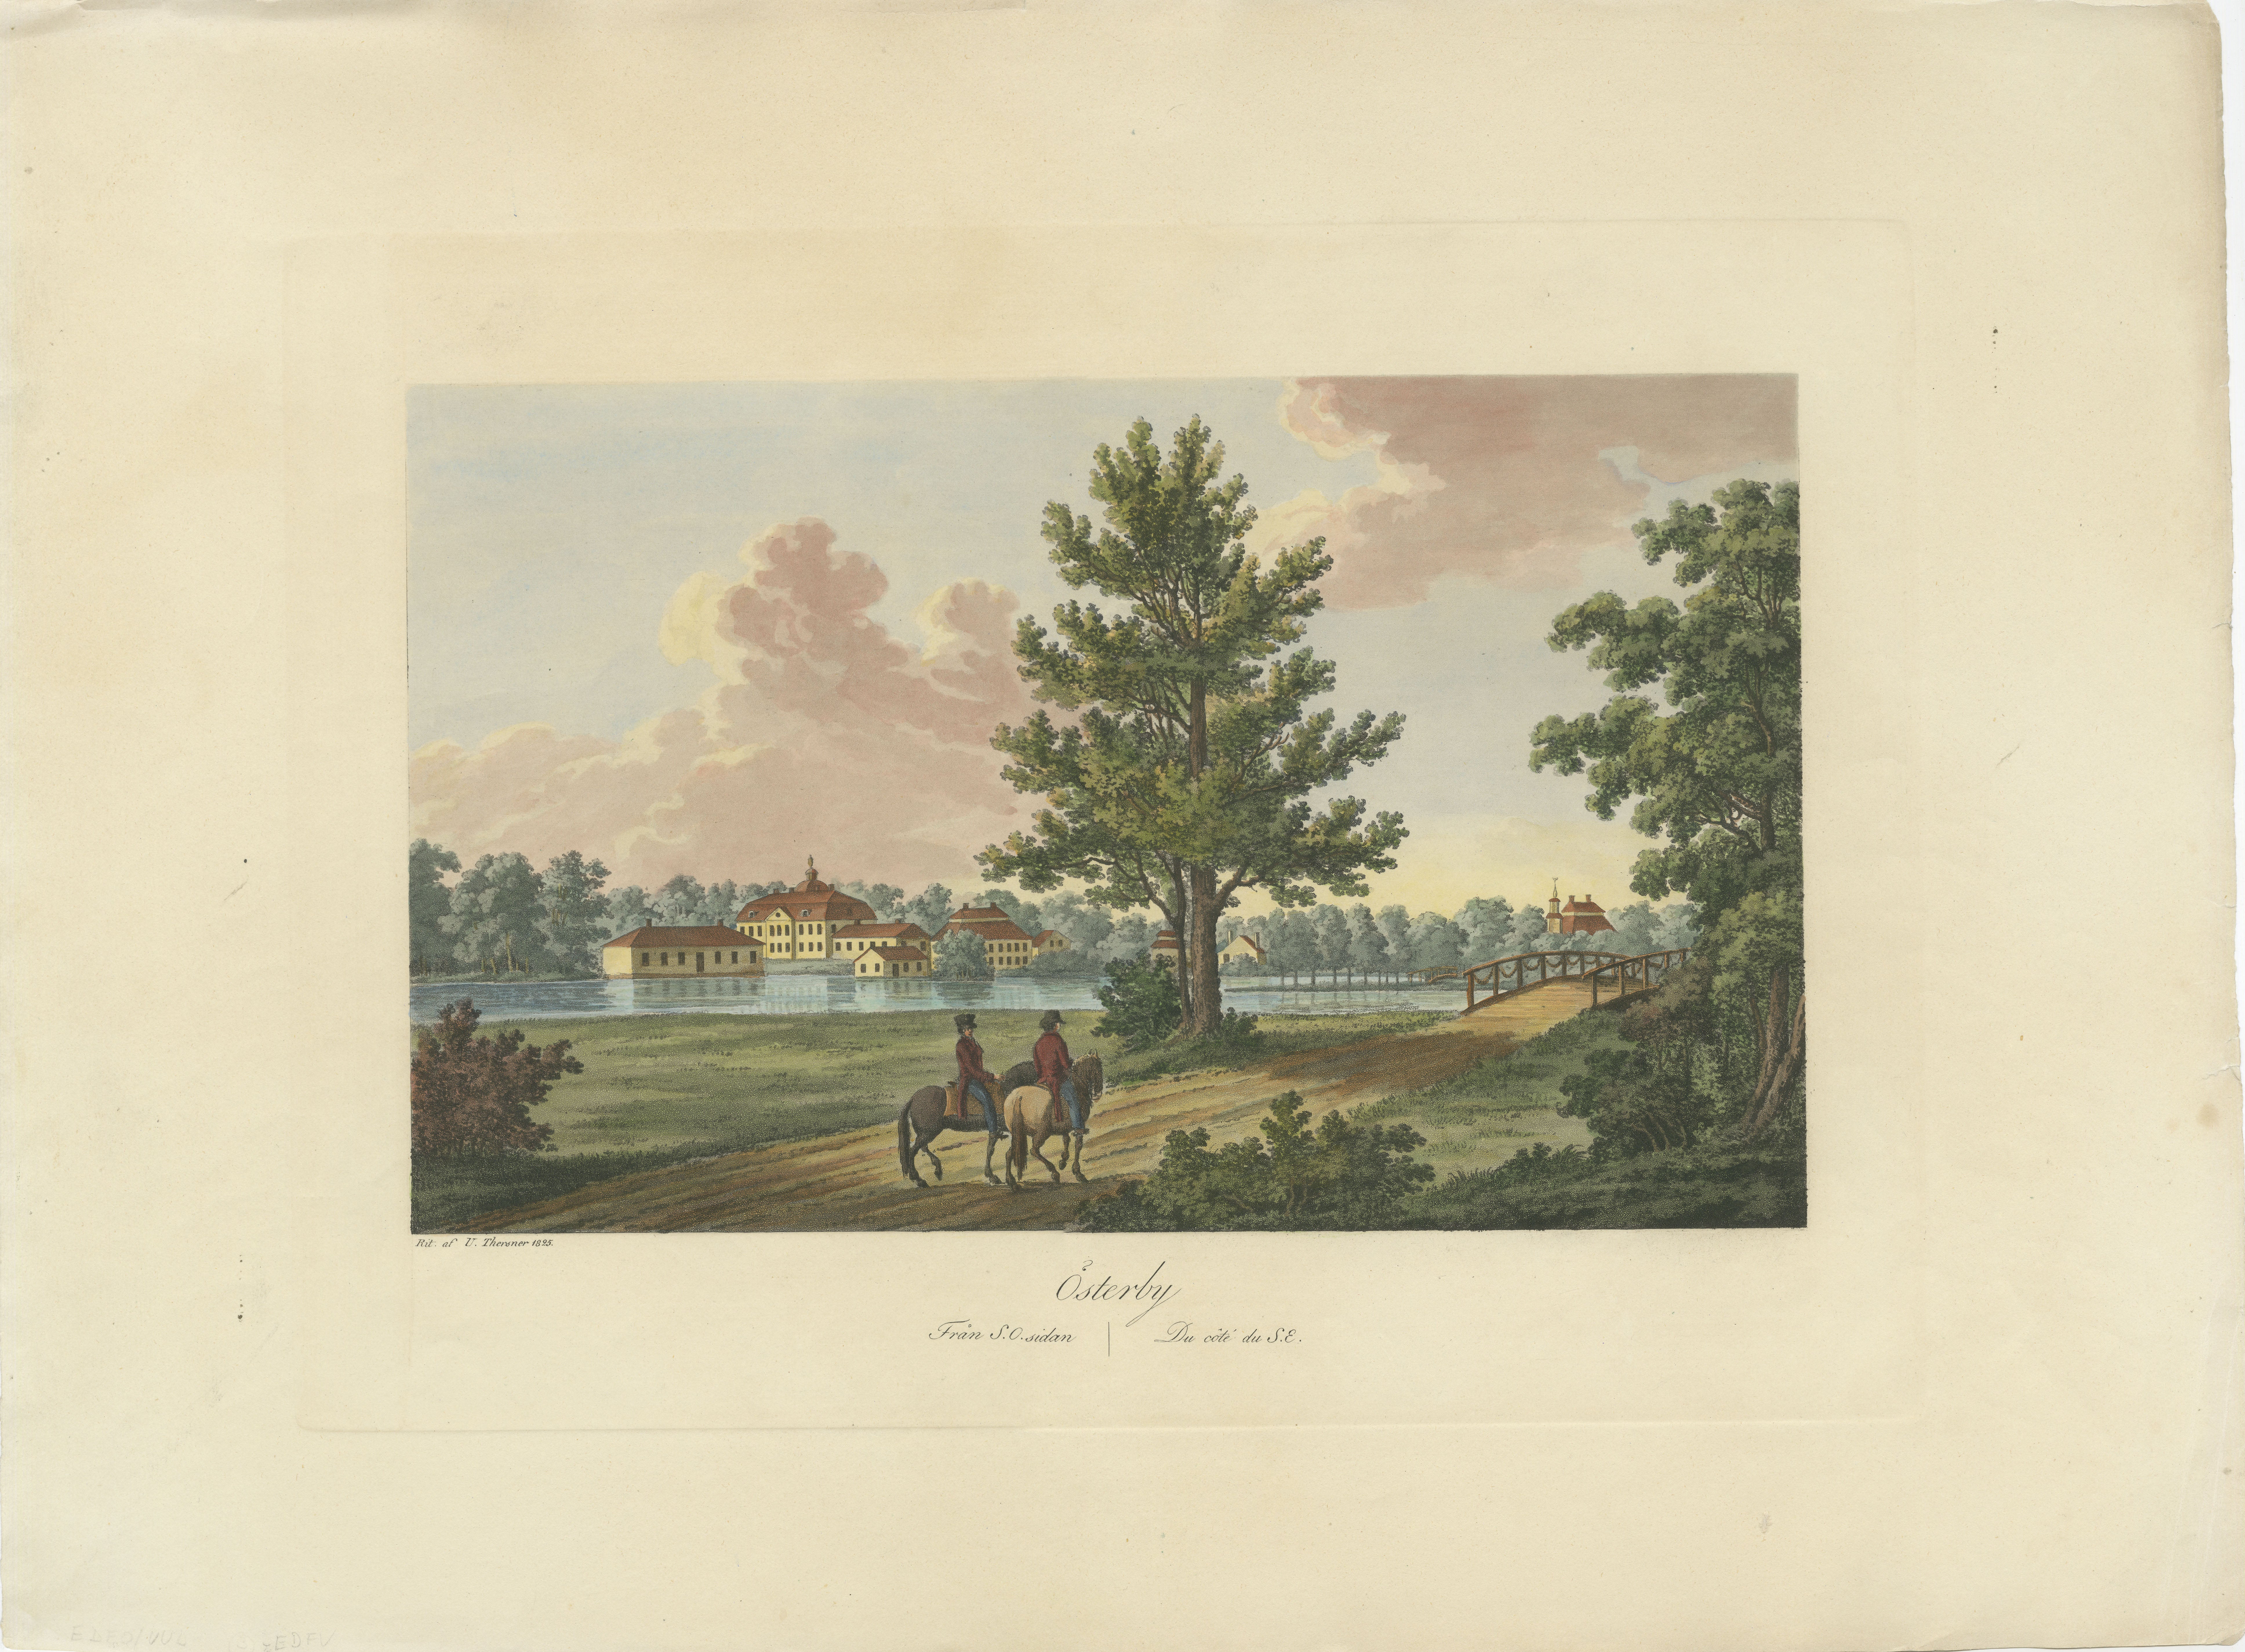 Gentle Repose at Österby: An 1824 Aquatint by Ulrik Thersner.

This aquatint by Ulrik Thersner, created in 1824, depicts the serene landscape of Österby in Sweden. The image is suffused with a gentle light that bathes the scene in a warm, inviting